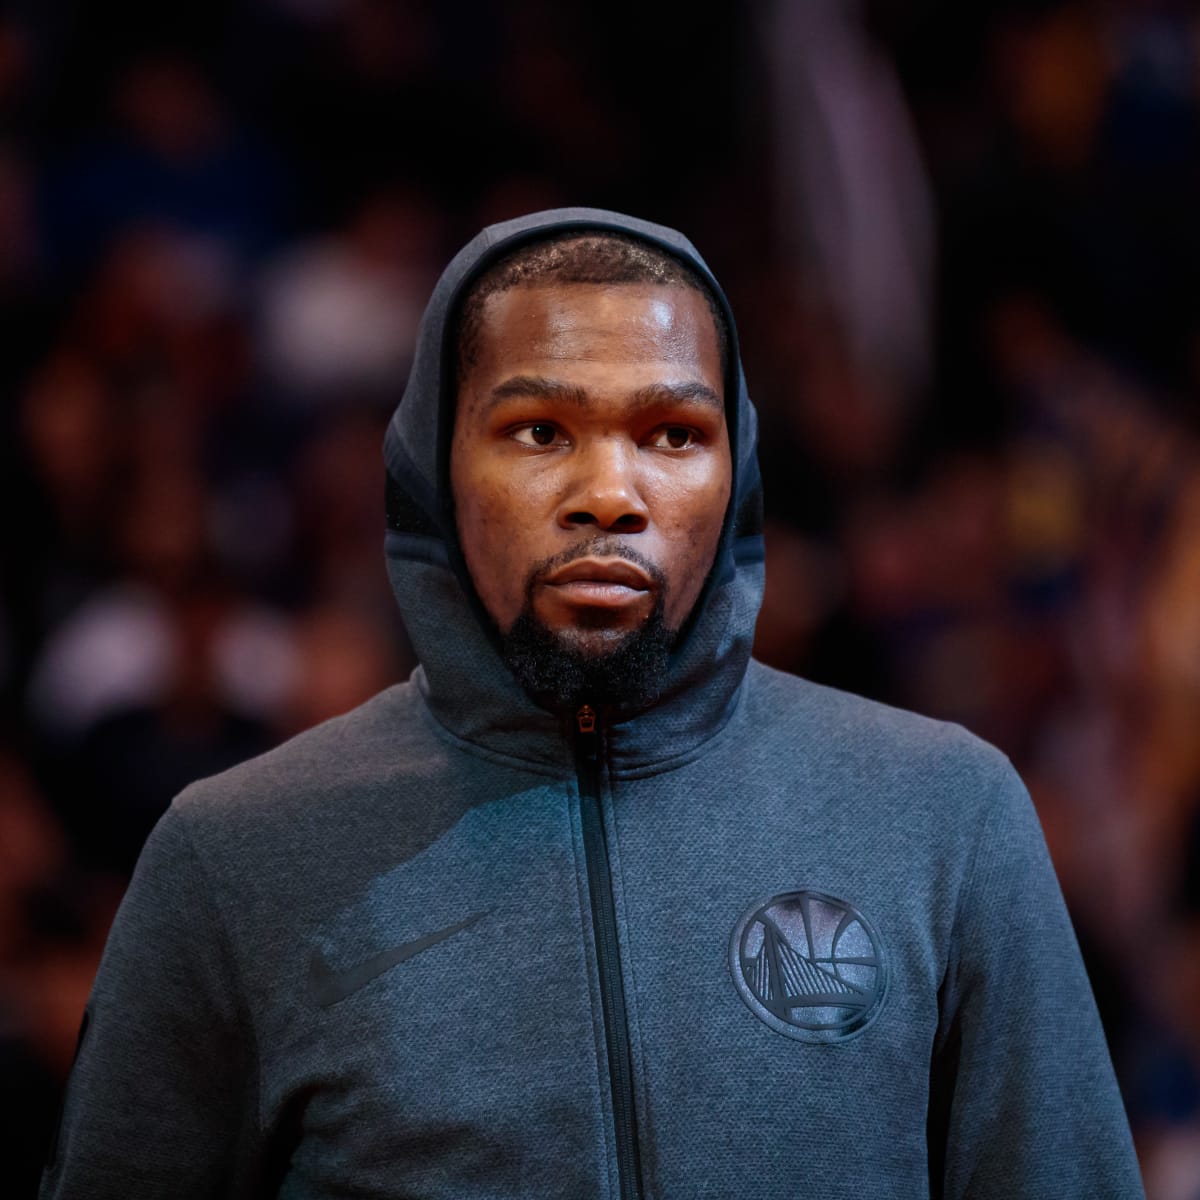 Kevin Durant became a trending topic in response to Shohei Ohtani signing